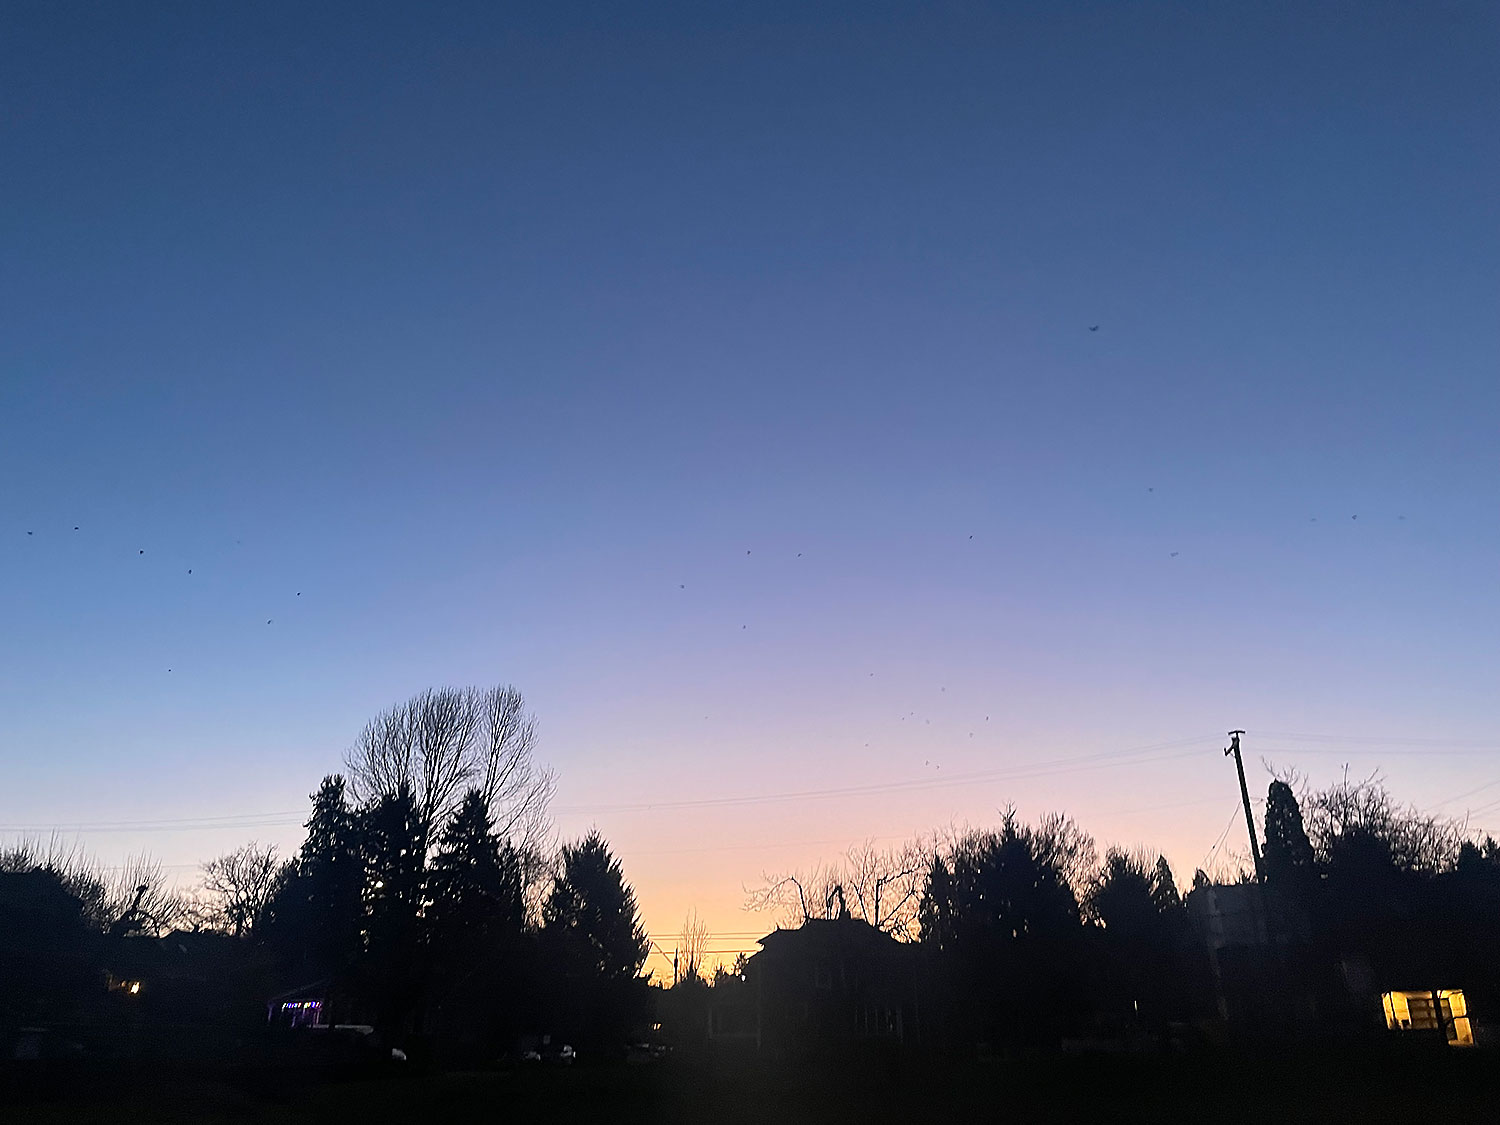 Dawn and spring, purple sky, the silhouettes of trees and houses, a lit window.